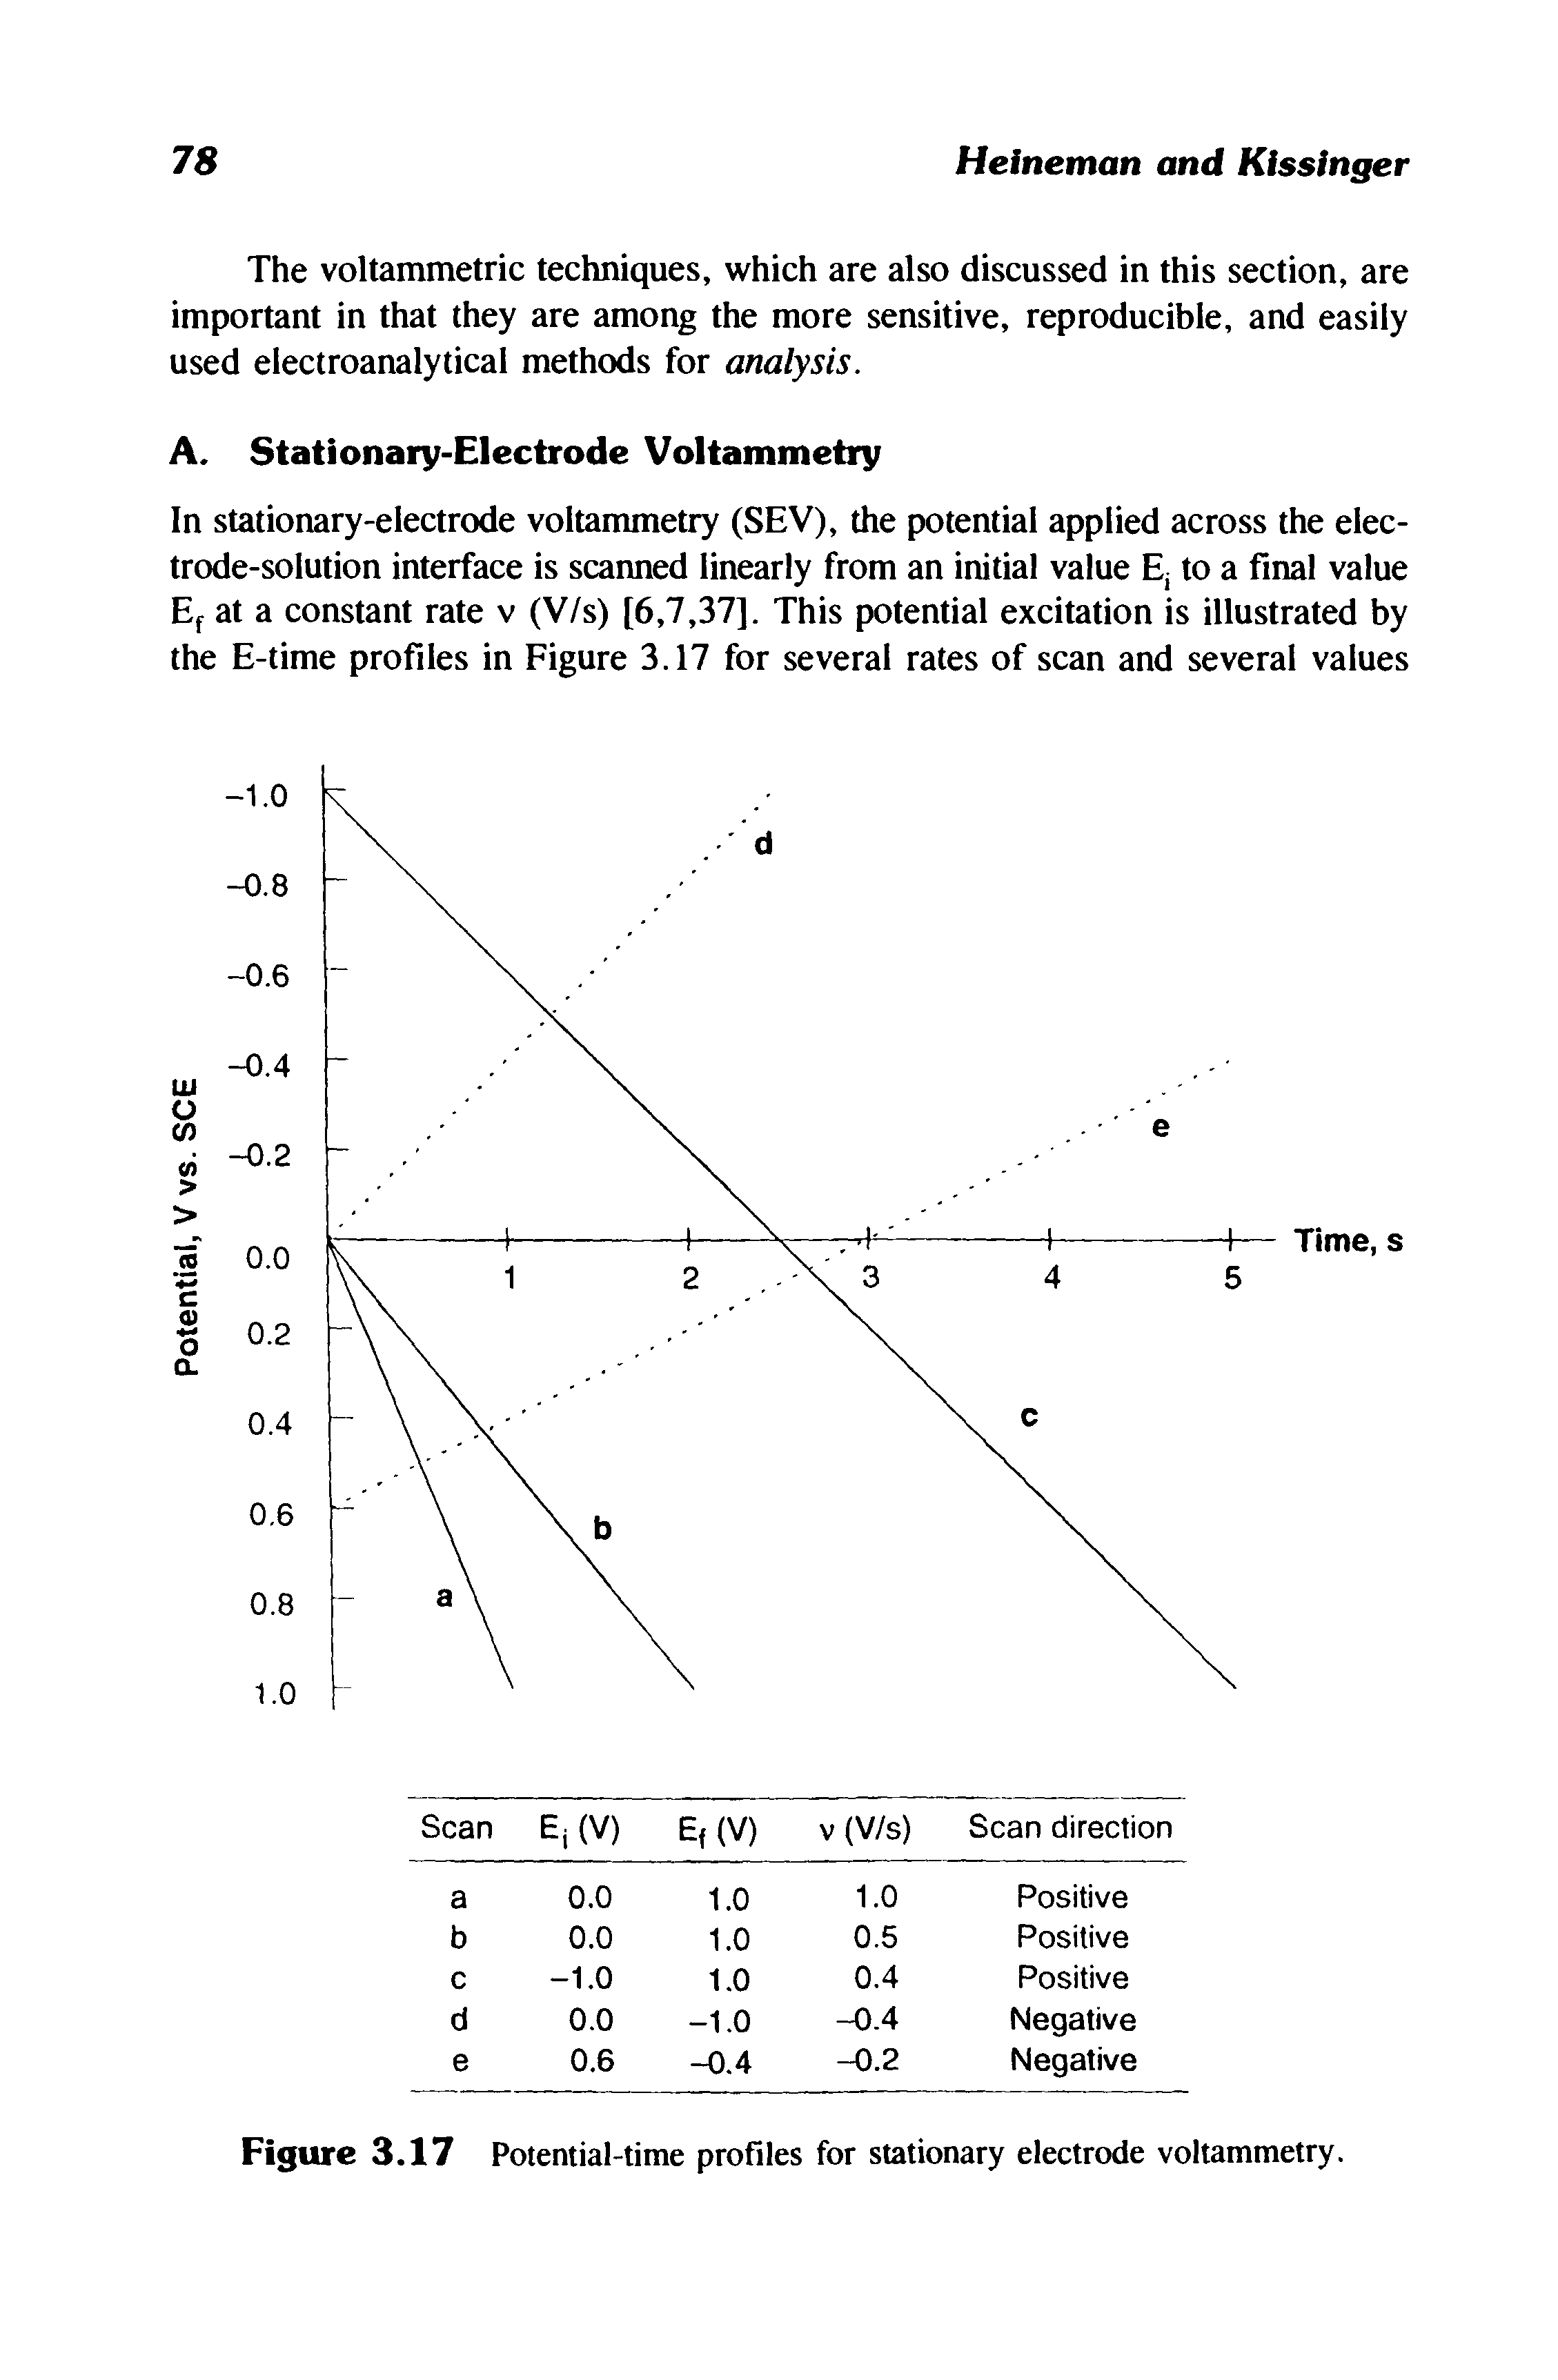 Figure 3.17 Potential-time profiles for stationary electrode voltammetry.